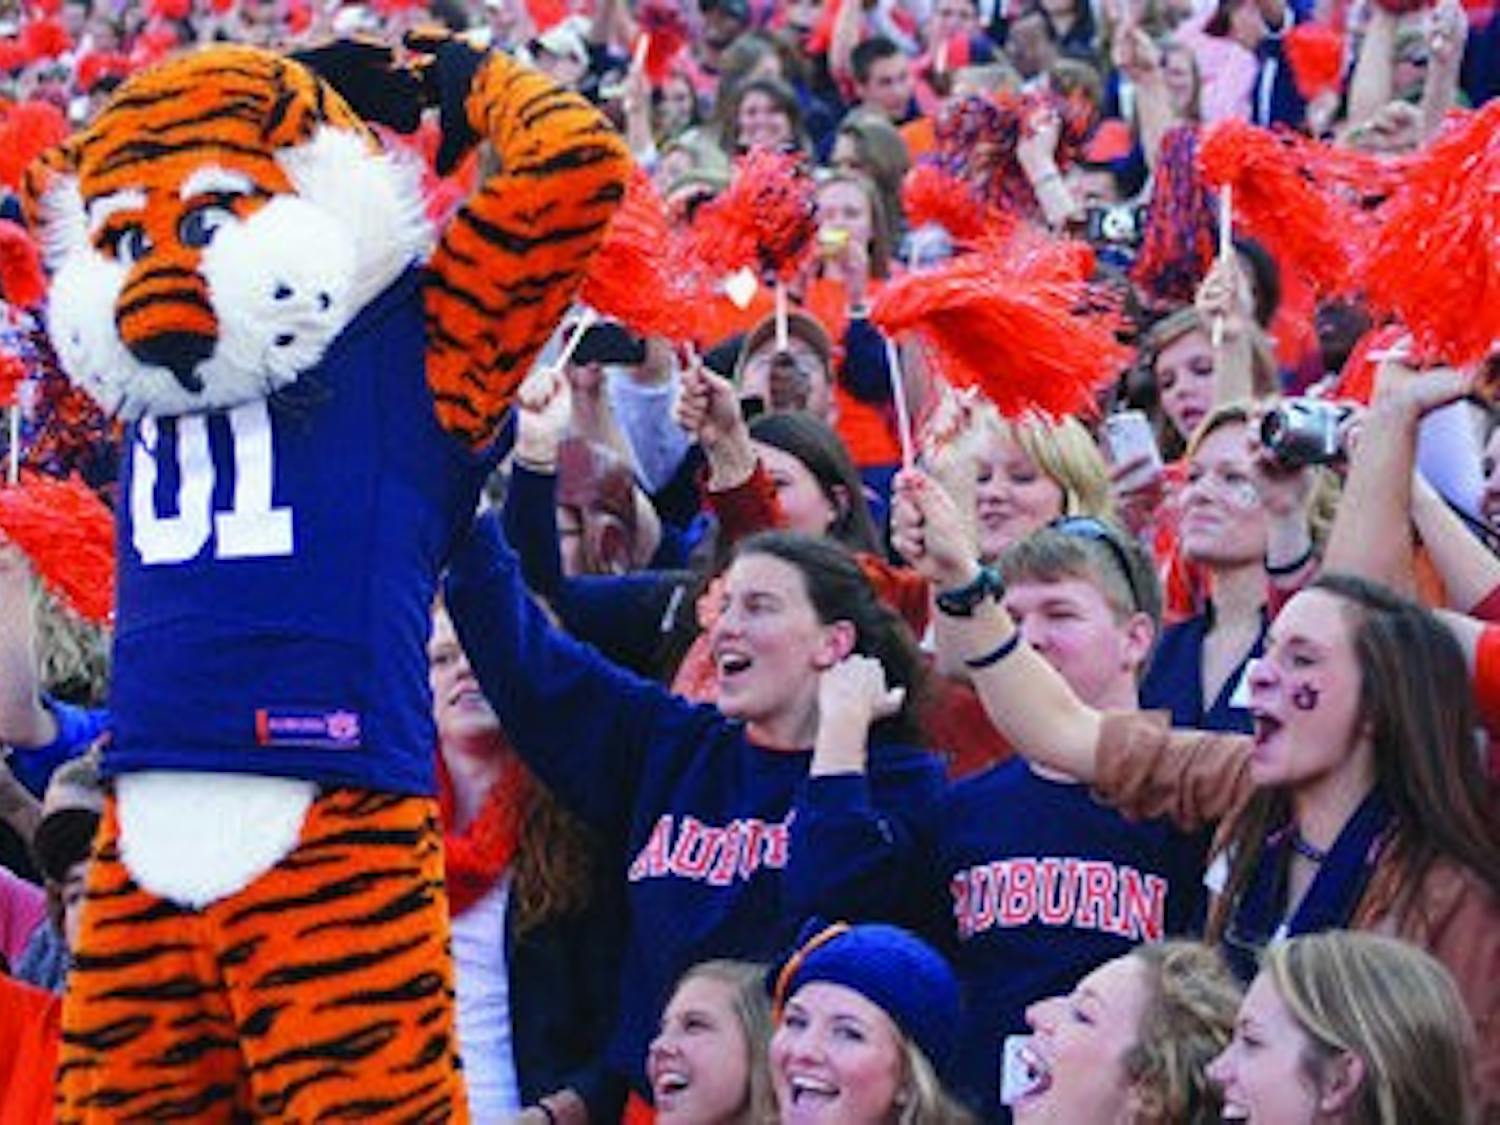 Aubie gets the crowd of Auburn students in Jordan-Hare Stadium pumped up at Saturday's Iron Bowl against the University of Alabama. (Robert E. Lee / ASSISTANT CAMPUS EDITOR)